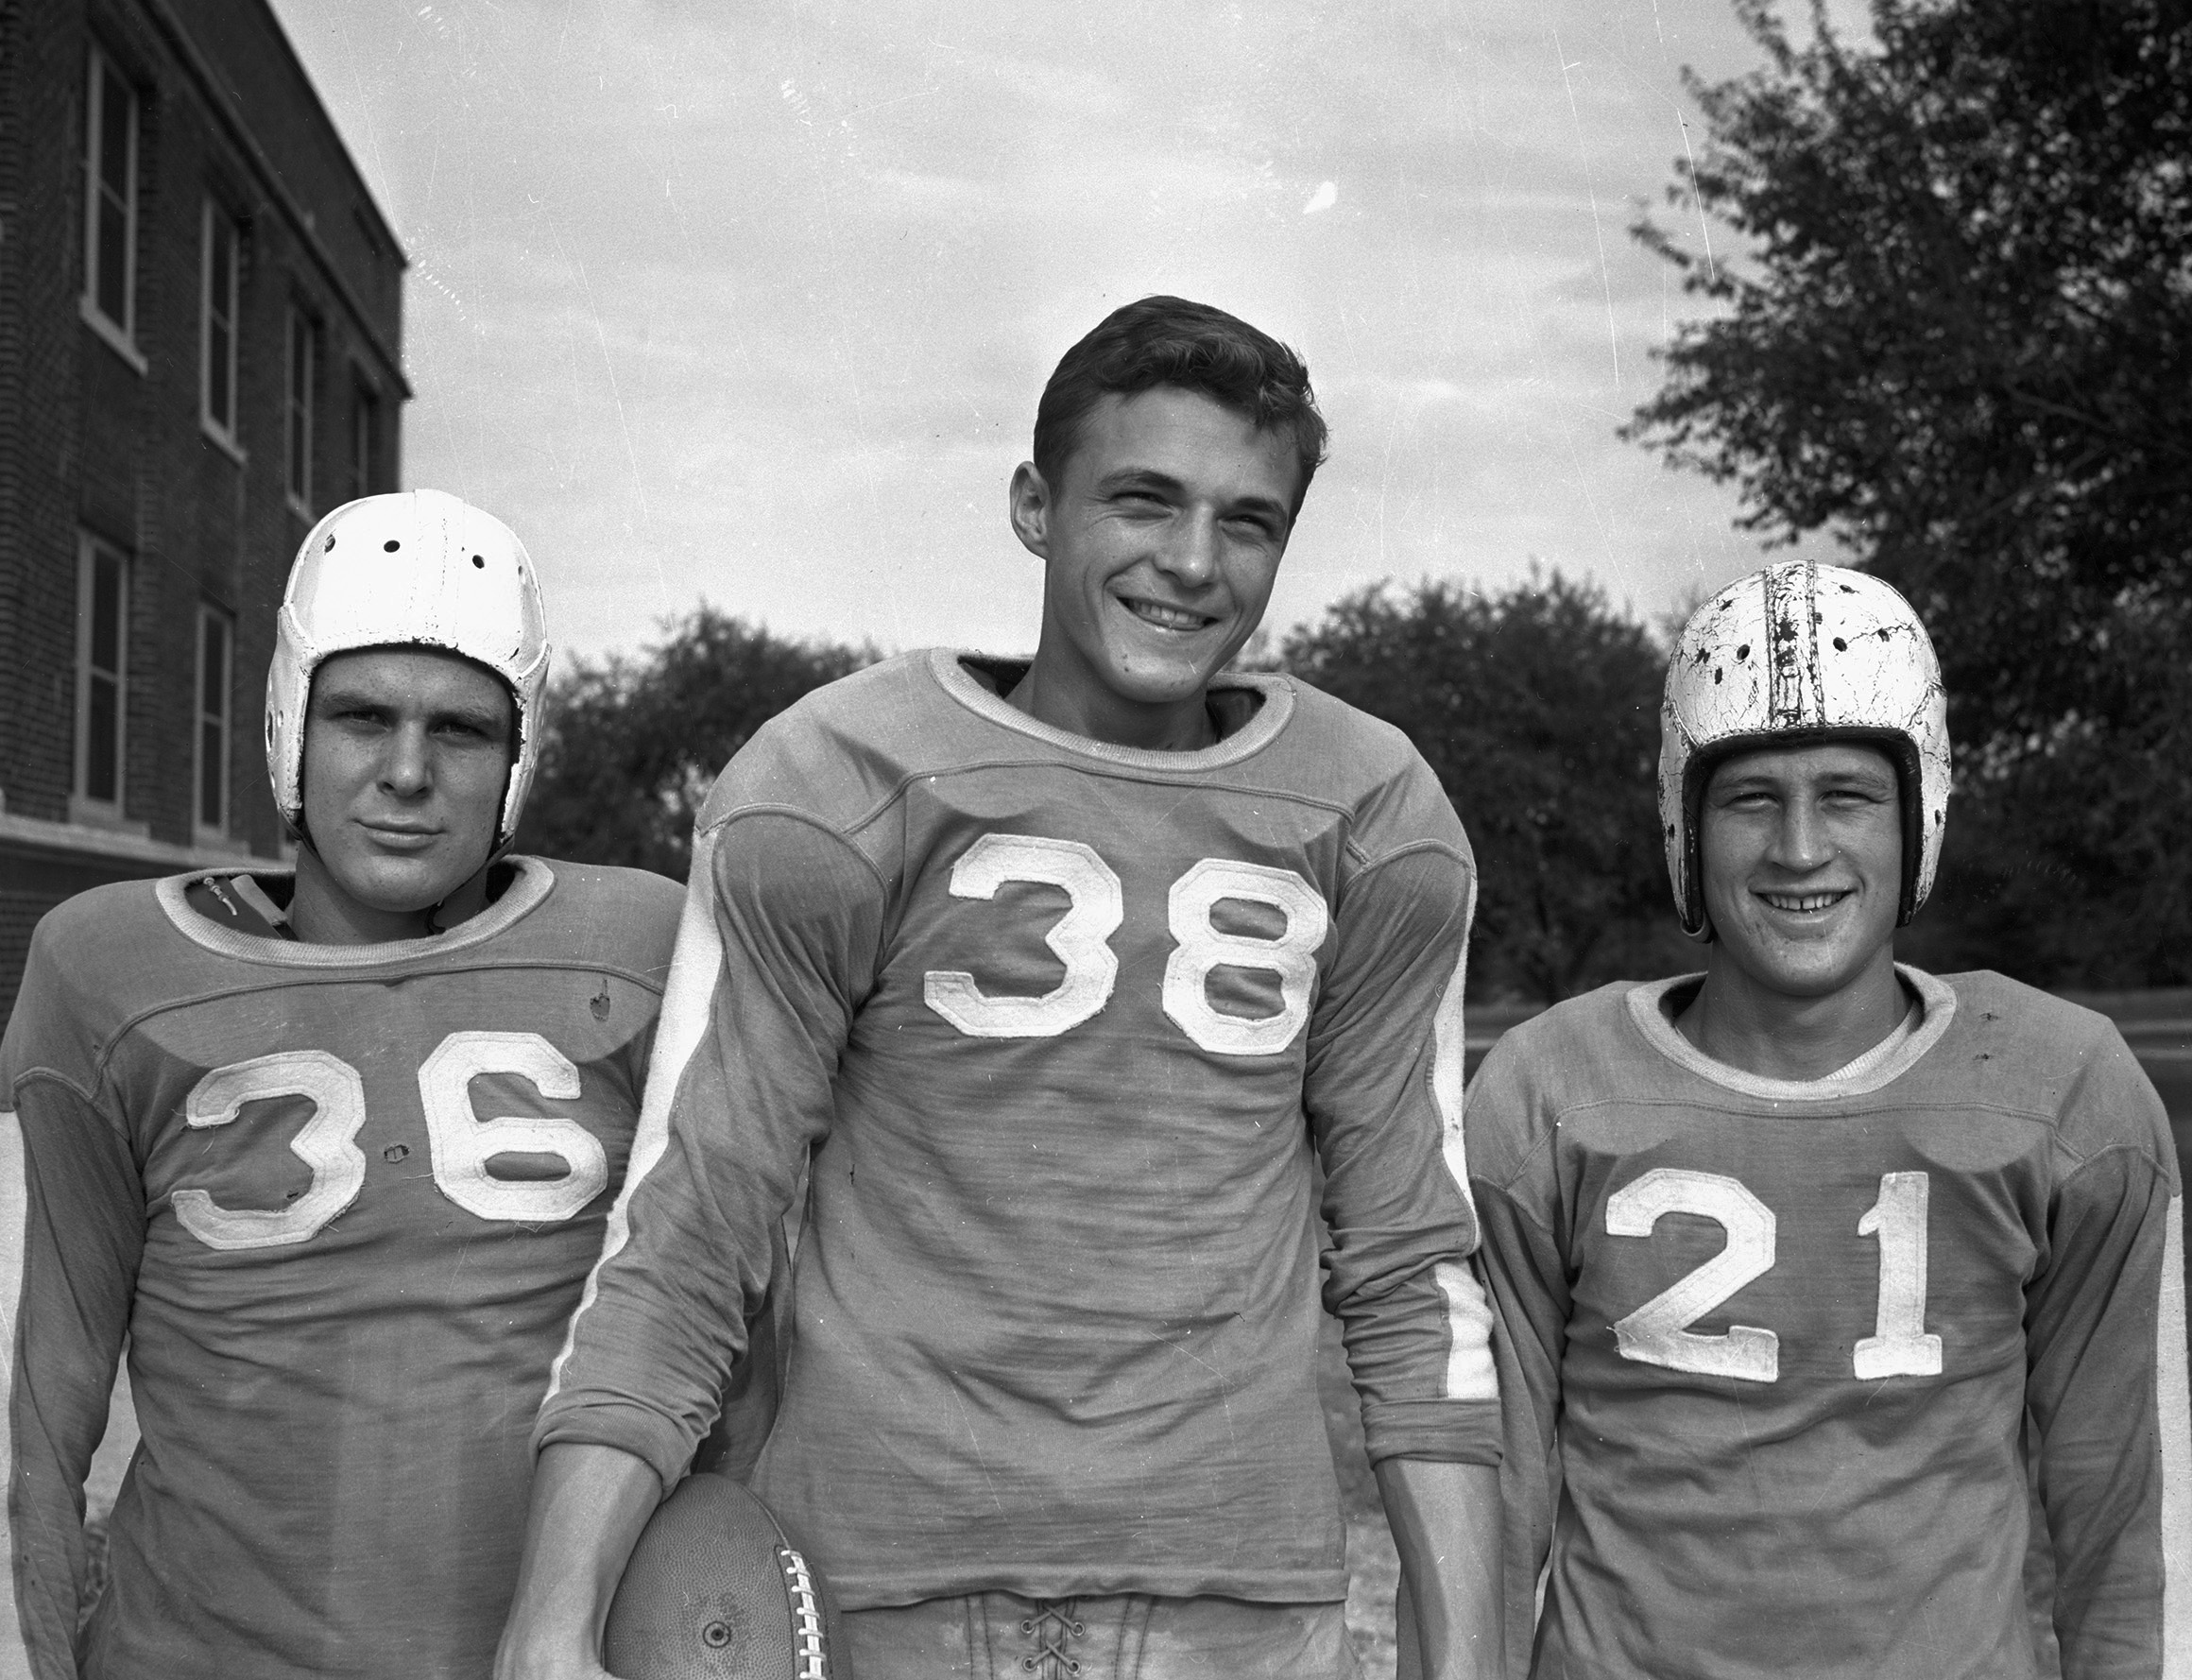 three young men stand side by side in their football uniforms, smiling for the camera; the two on the ends are wearing their helmets, while the middle man is not. behind them are trees and a brick building.